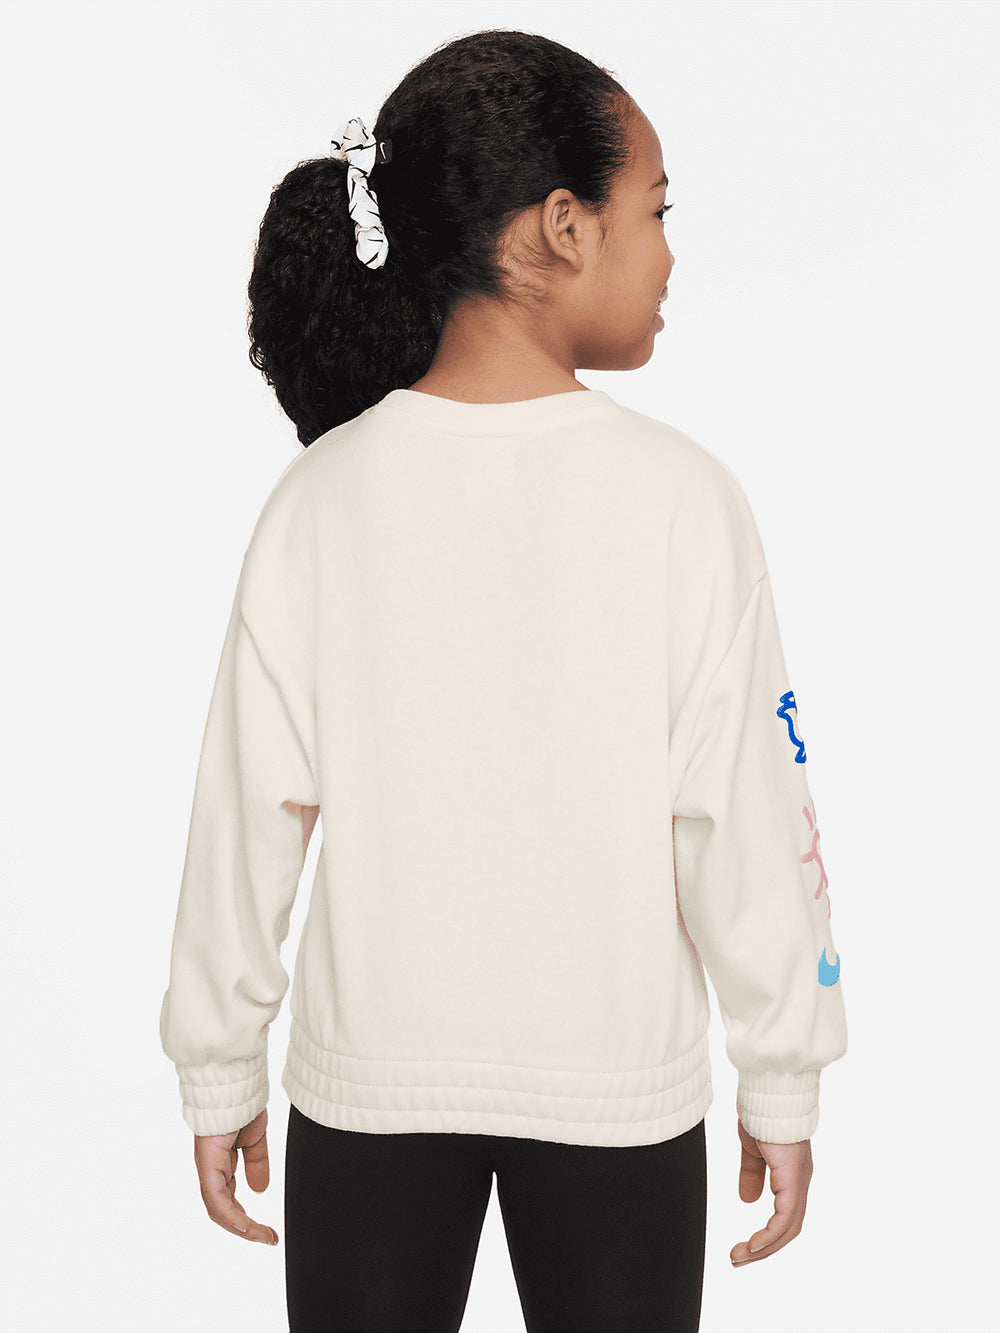 KIDS NIKE VALENTINES DAY CREW - CLEARANCE